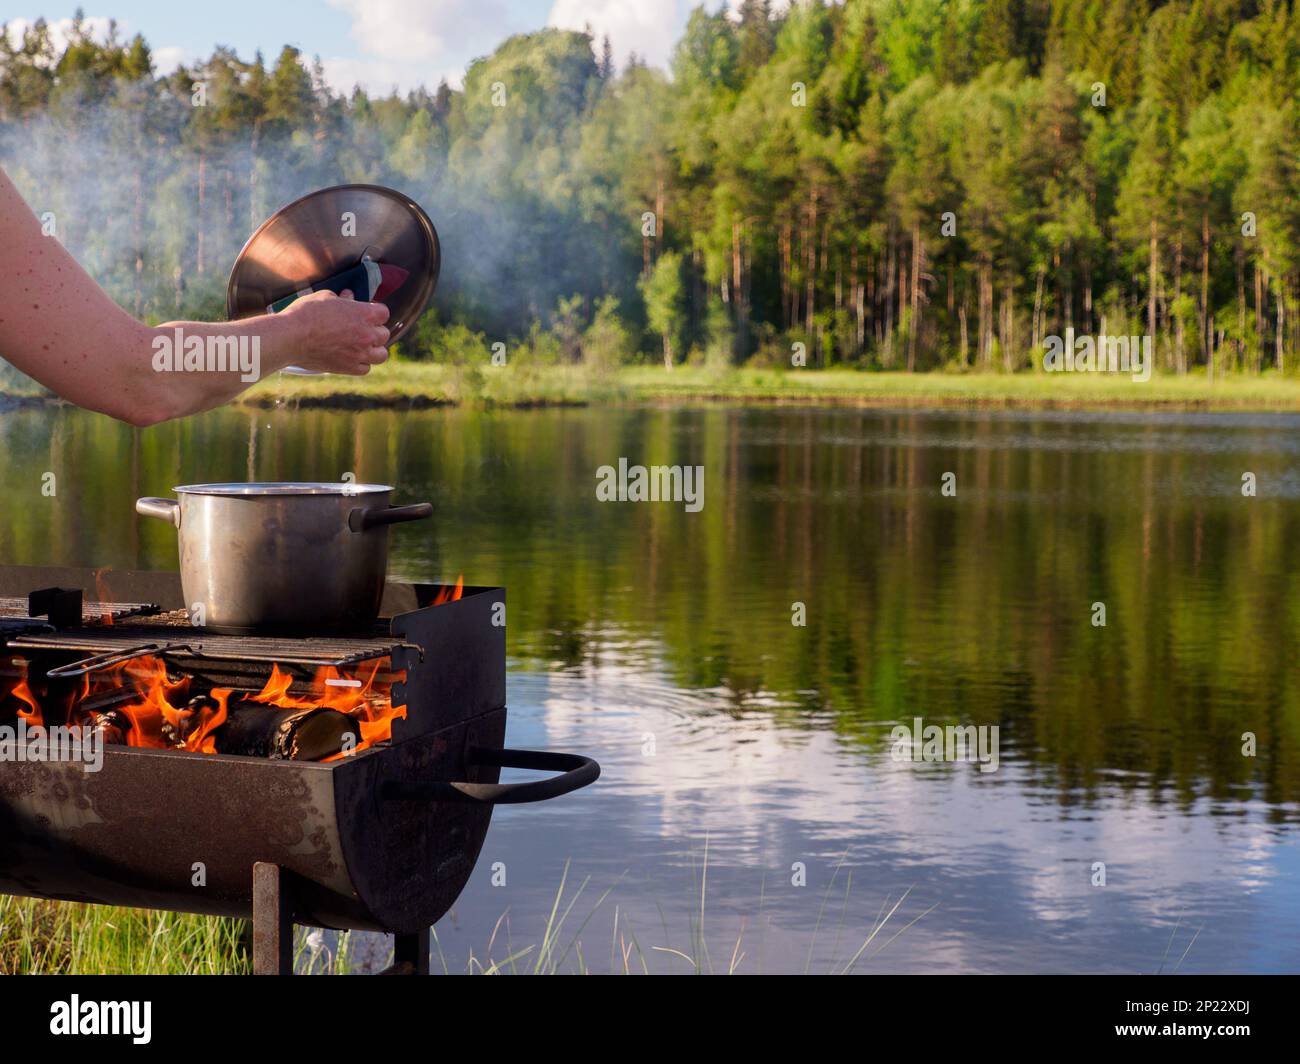 Party time. Grilling on the shores of the lake. Idyllic Swedish landscape in summer. Sweden. Northern Europe. Stock Photo